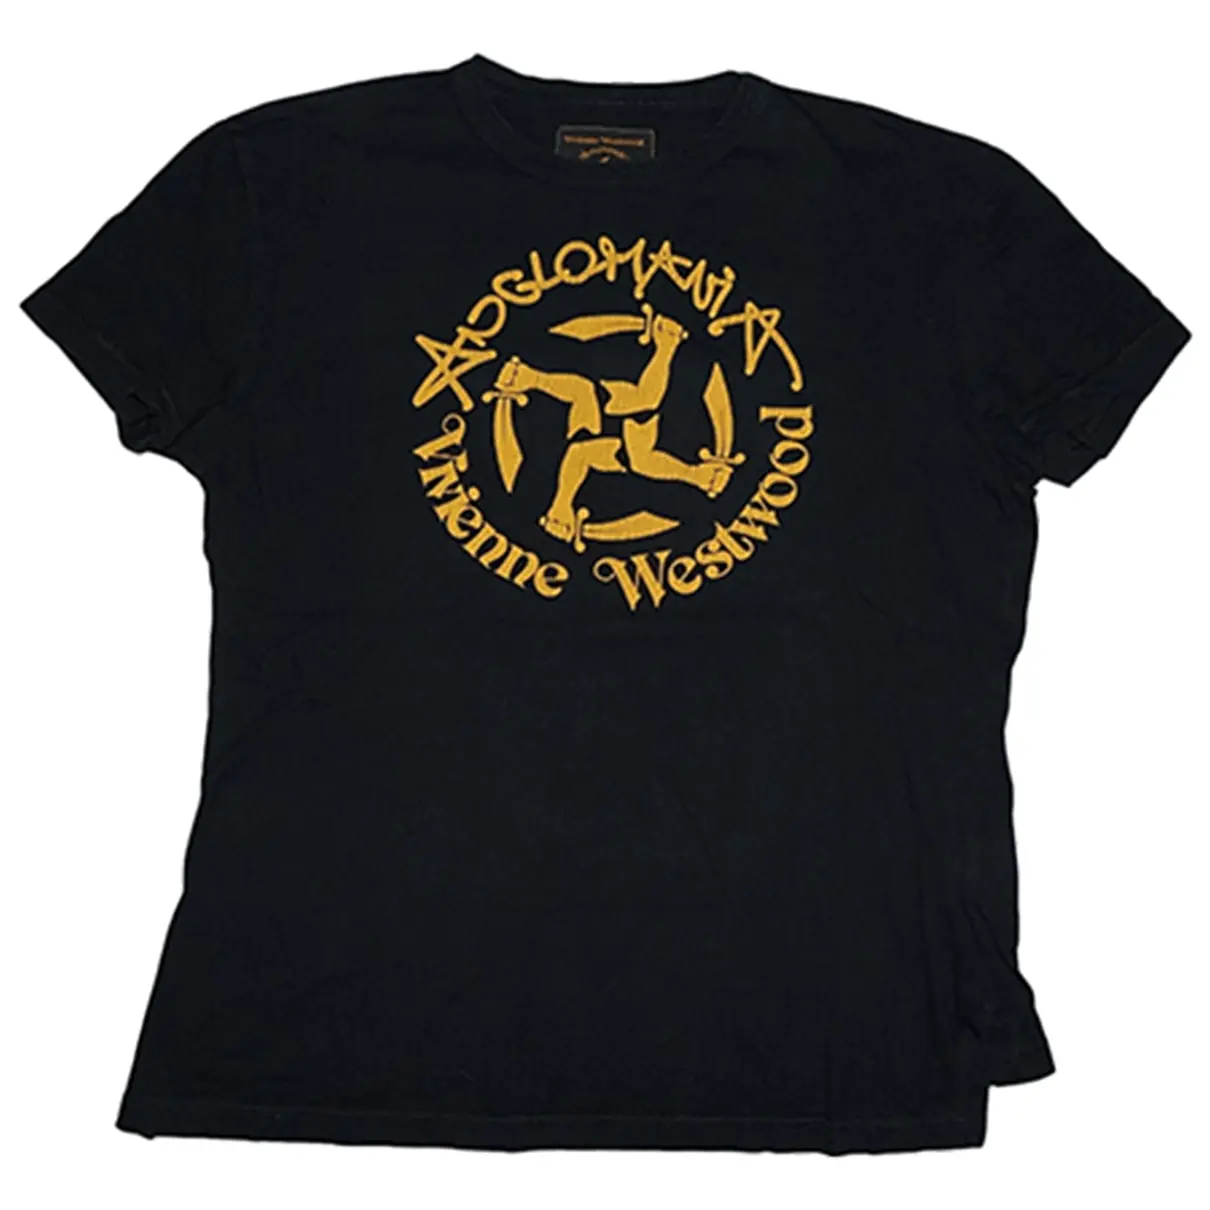 Cotton Top Vivienne Westwood Anglomania